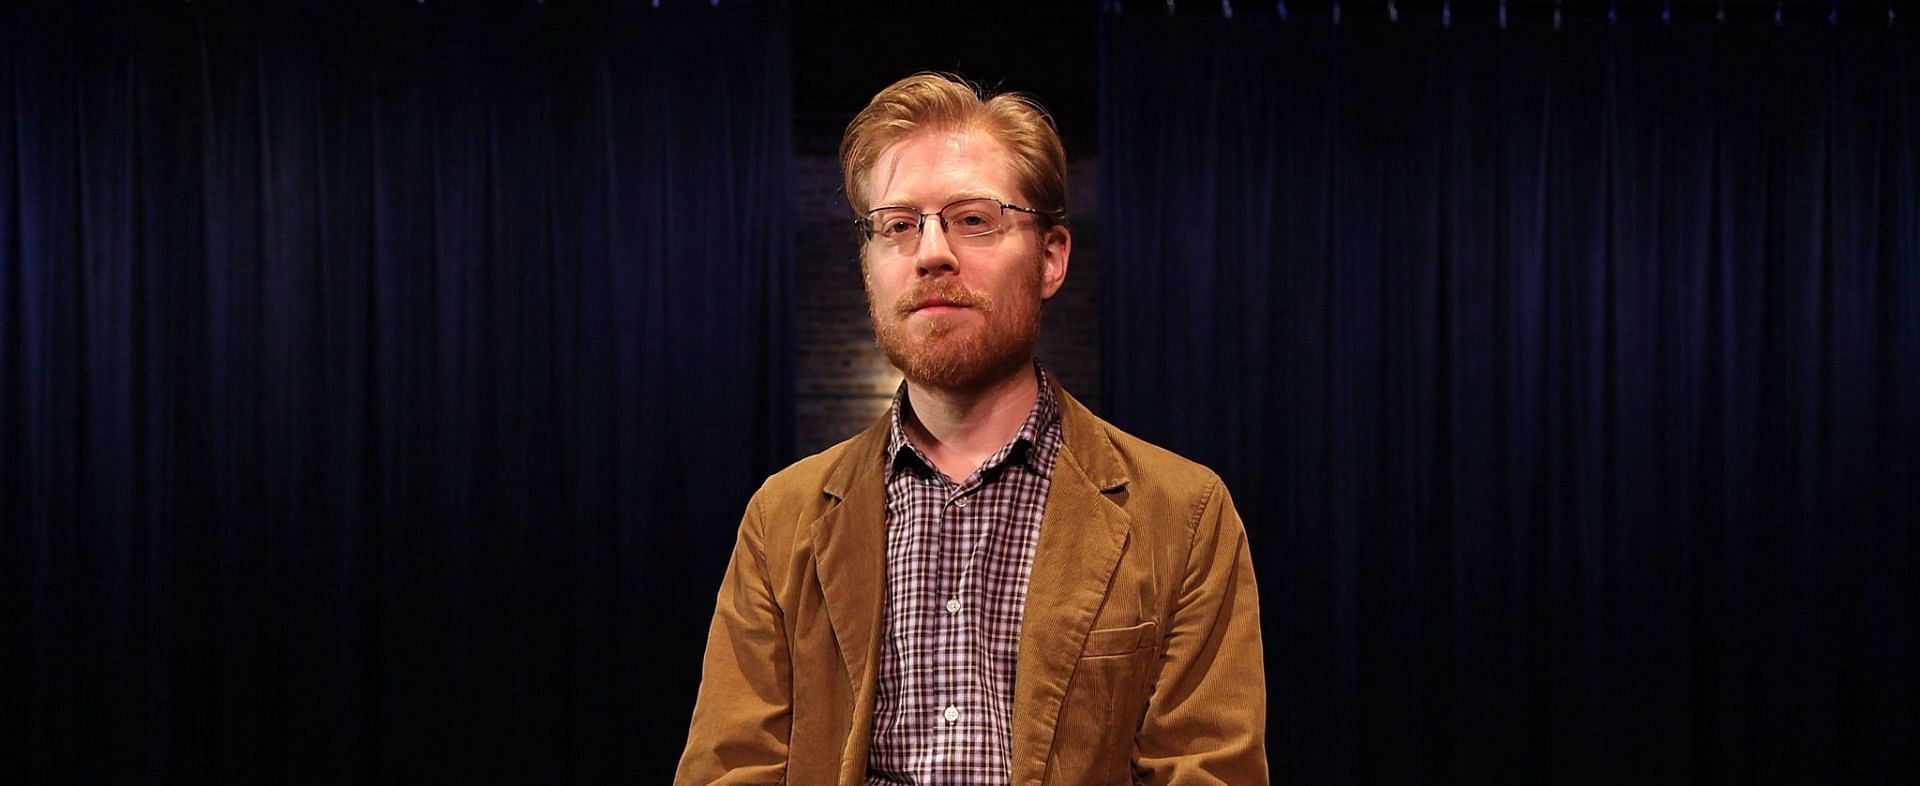 Anthony Rapp is an American film and theater actor (Image via Getty Images)